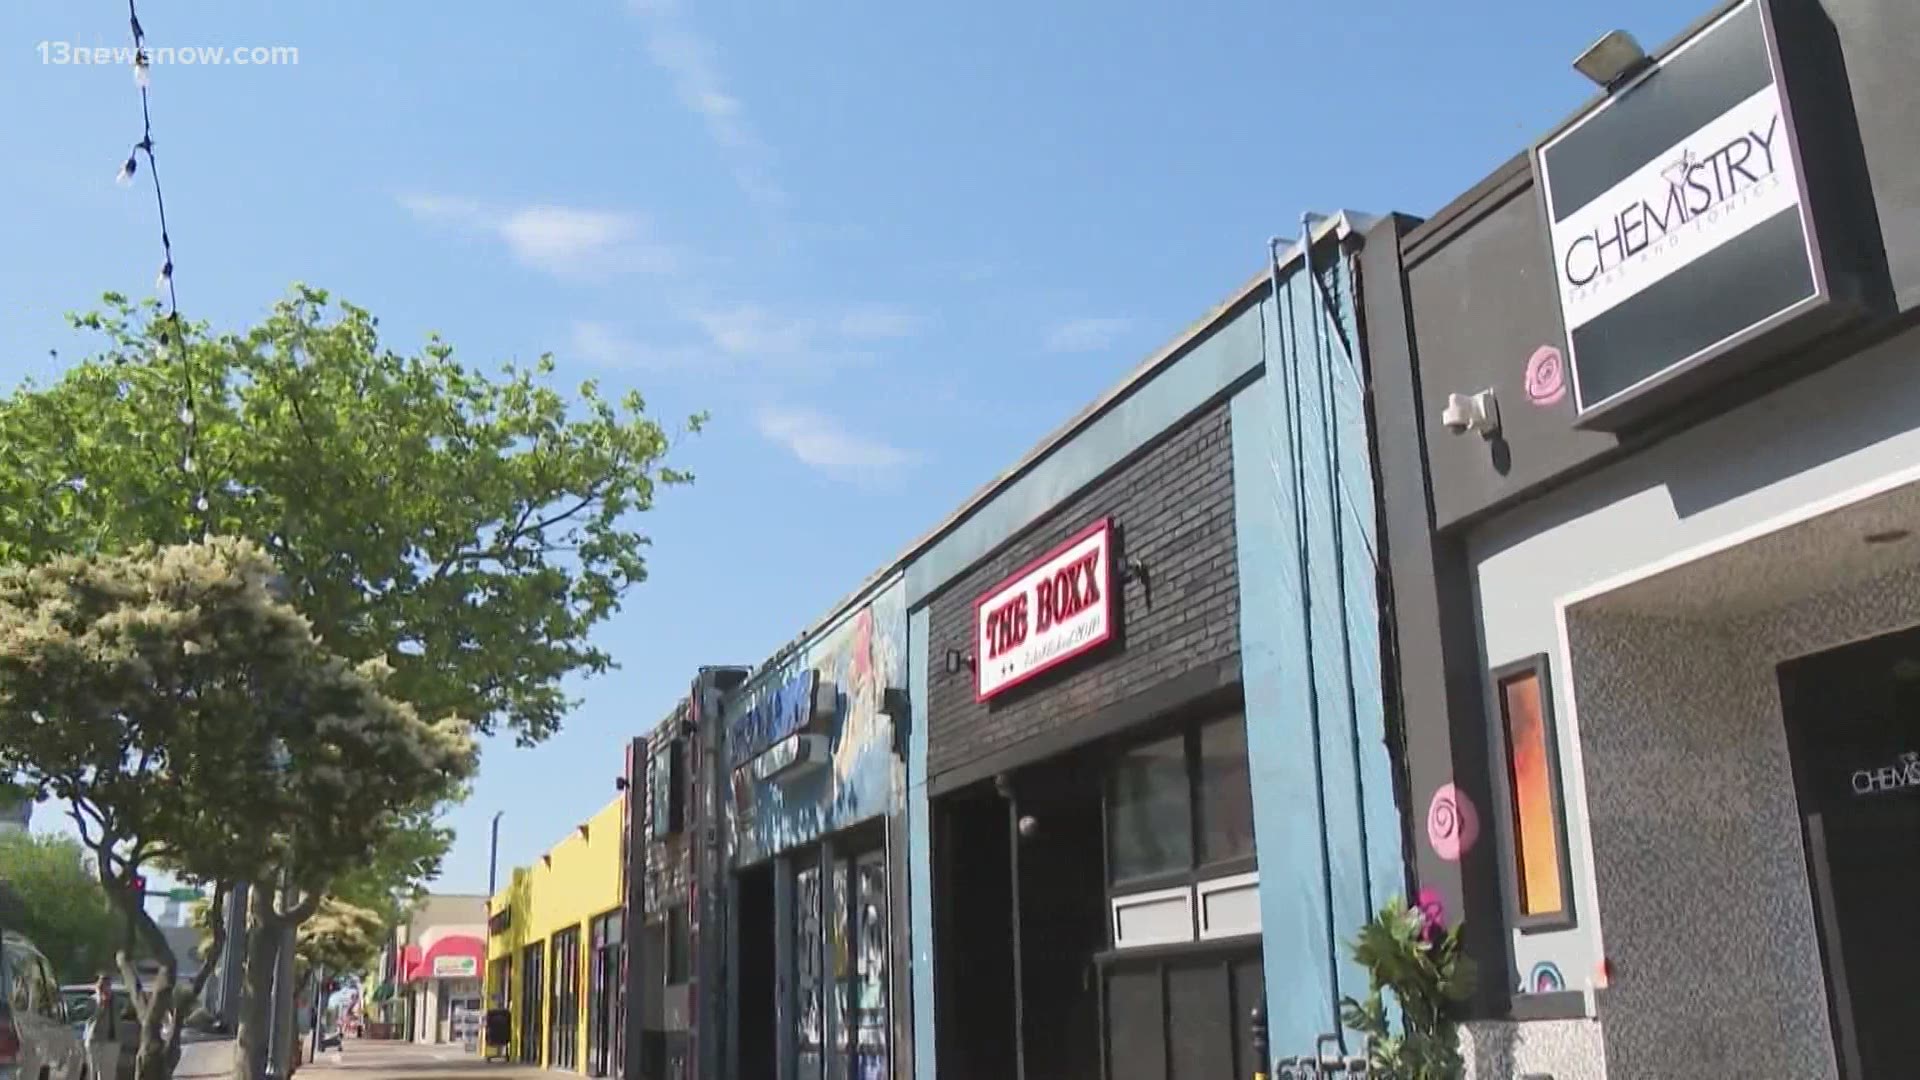 The Virginia Beach Police Department signed a contract to take over The Boxx bar following shootings in the area.